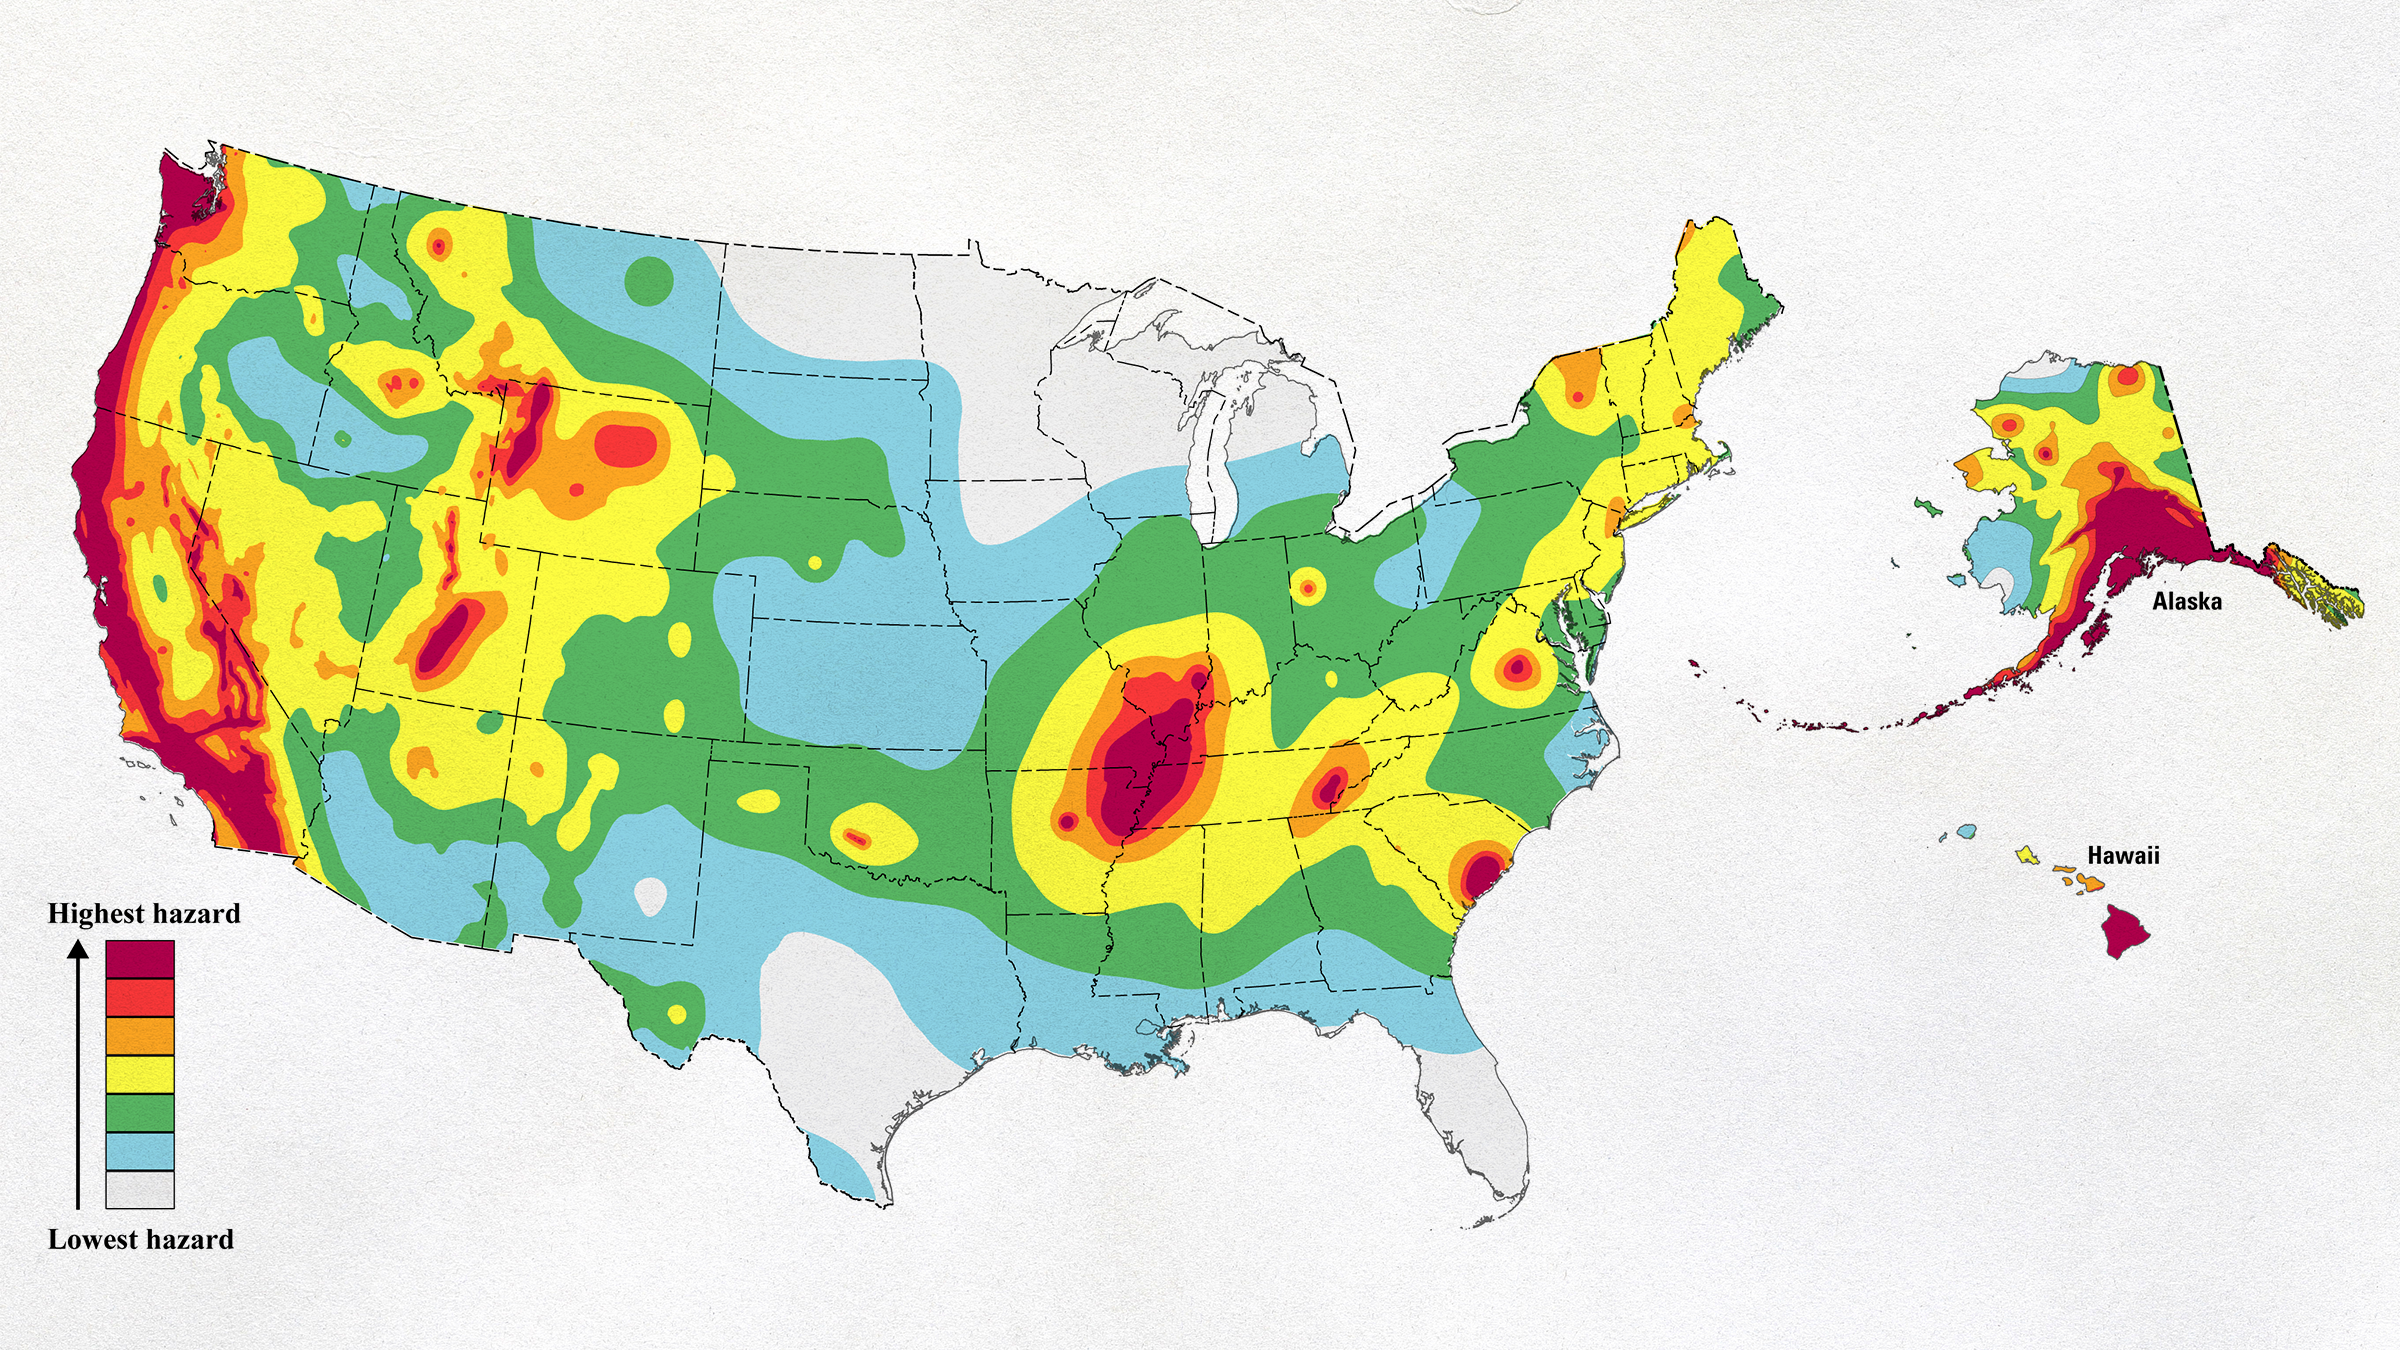 How threatened by earthquake are U.S. communities? New report gives
answers